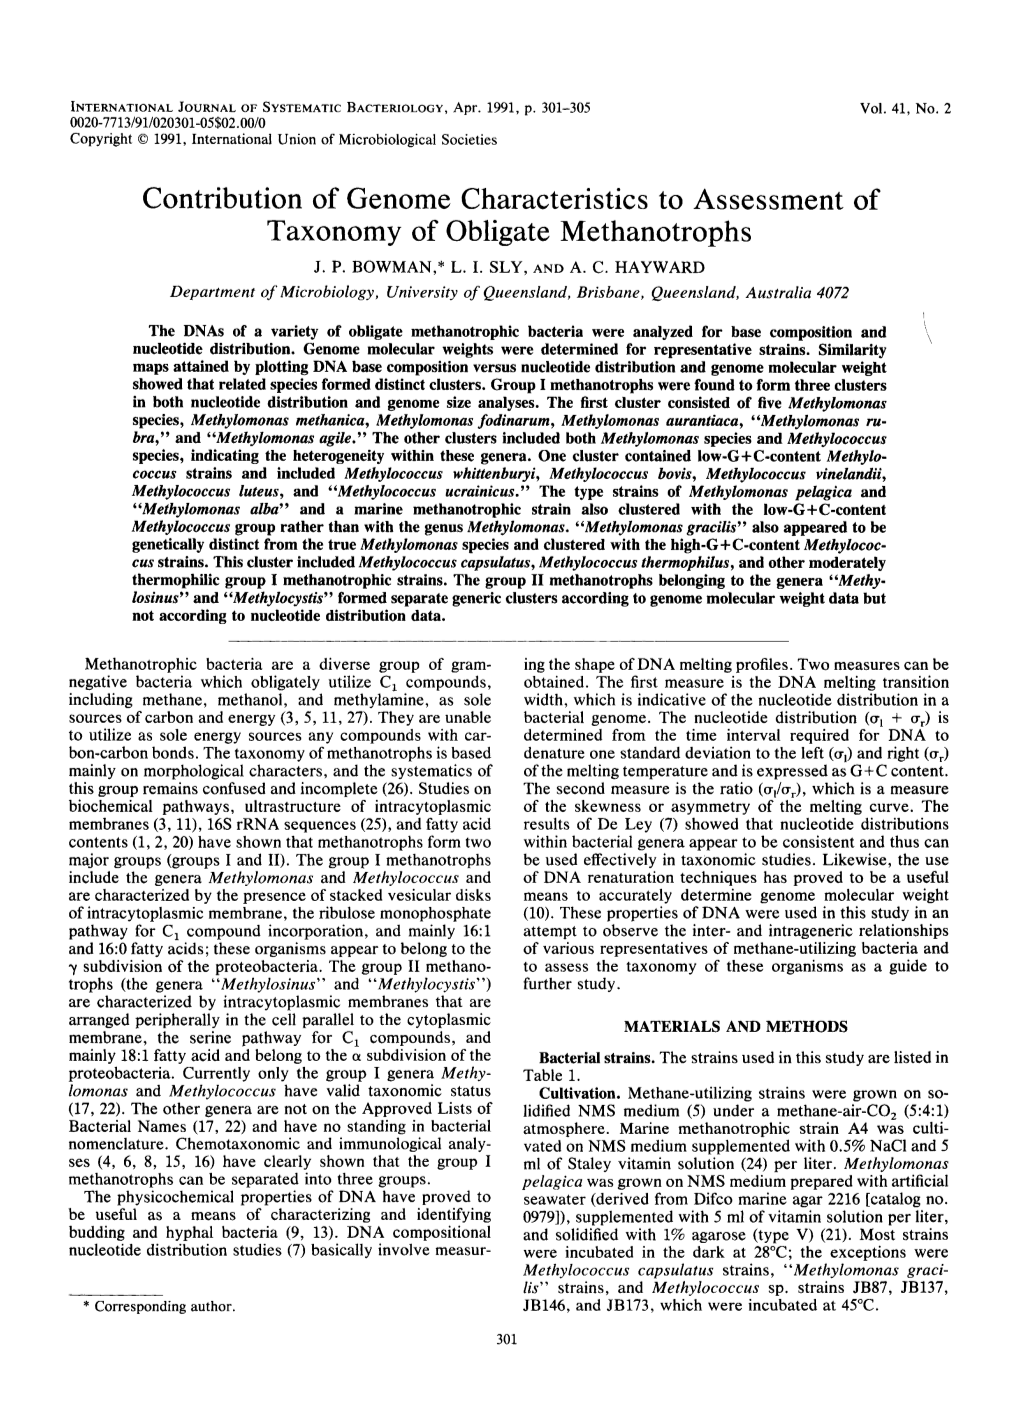 Contribution of Genome Characteristics to Assessment of Taxonomy of Obligate Methanotrophs J